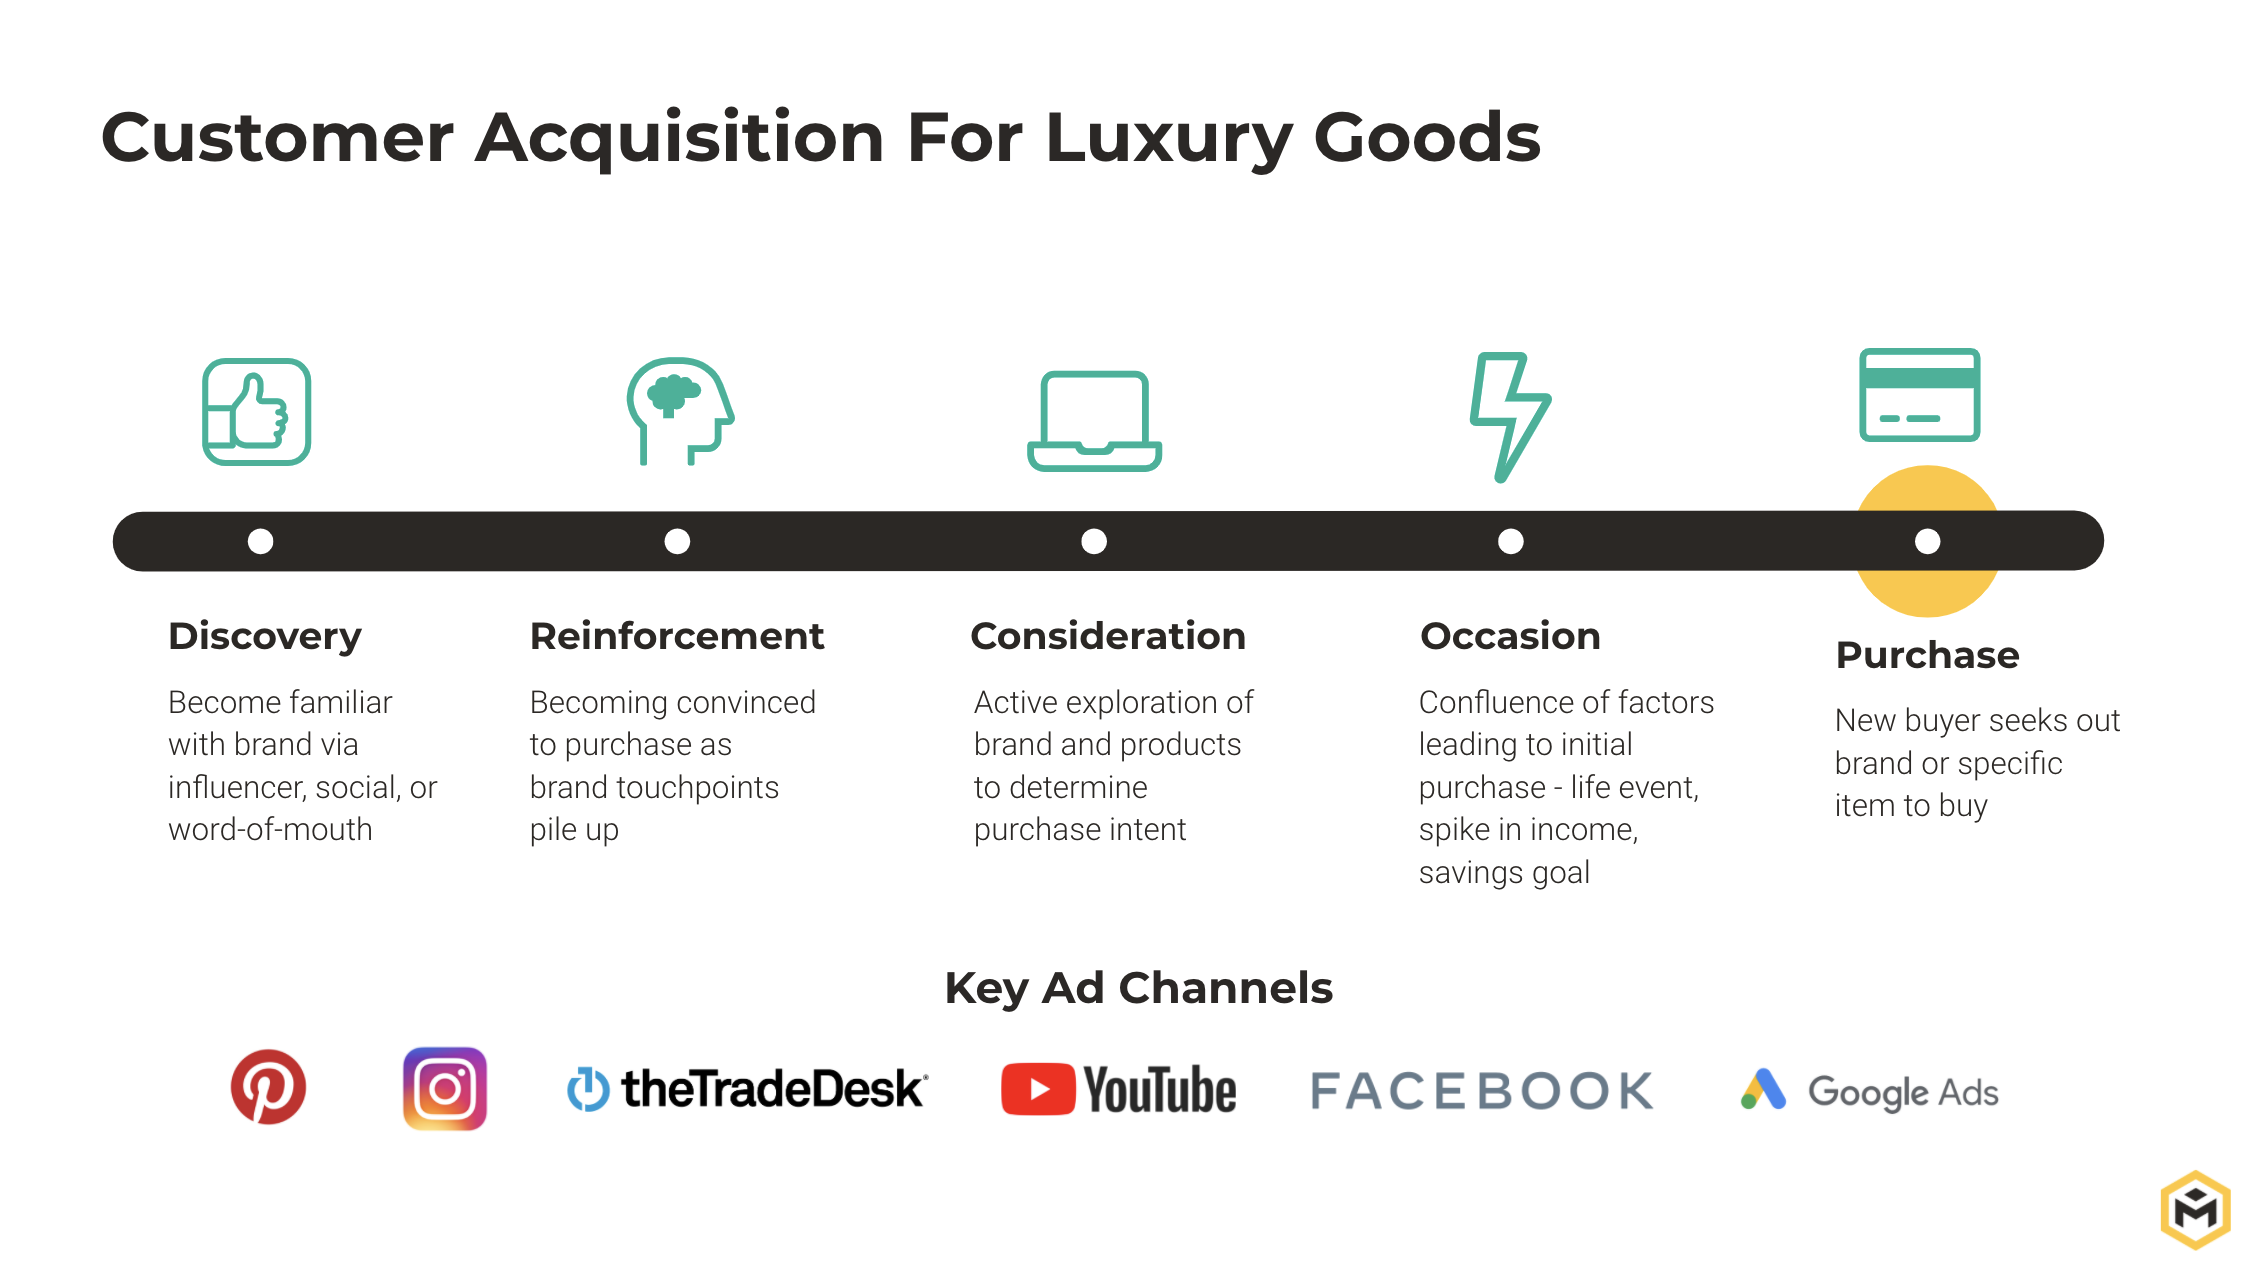 Customer Acquisition for Luxury Goods